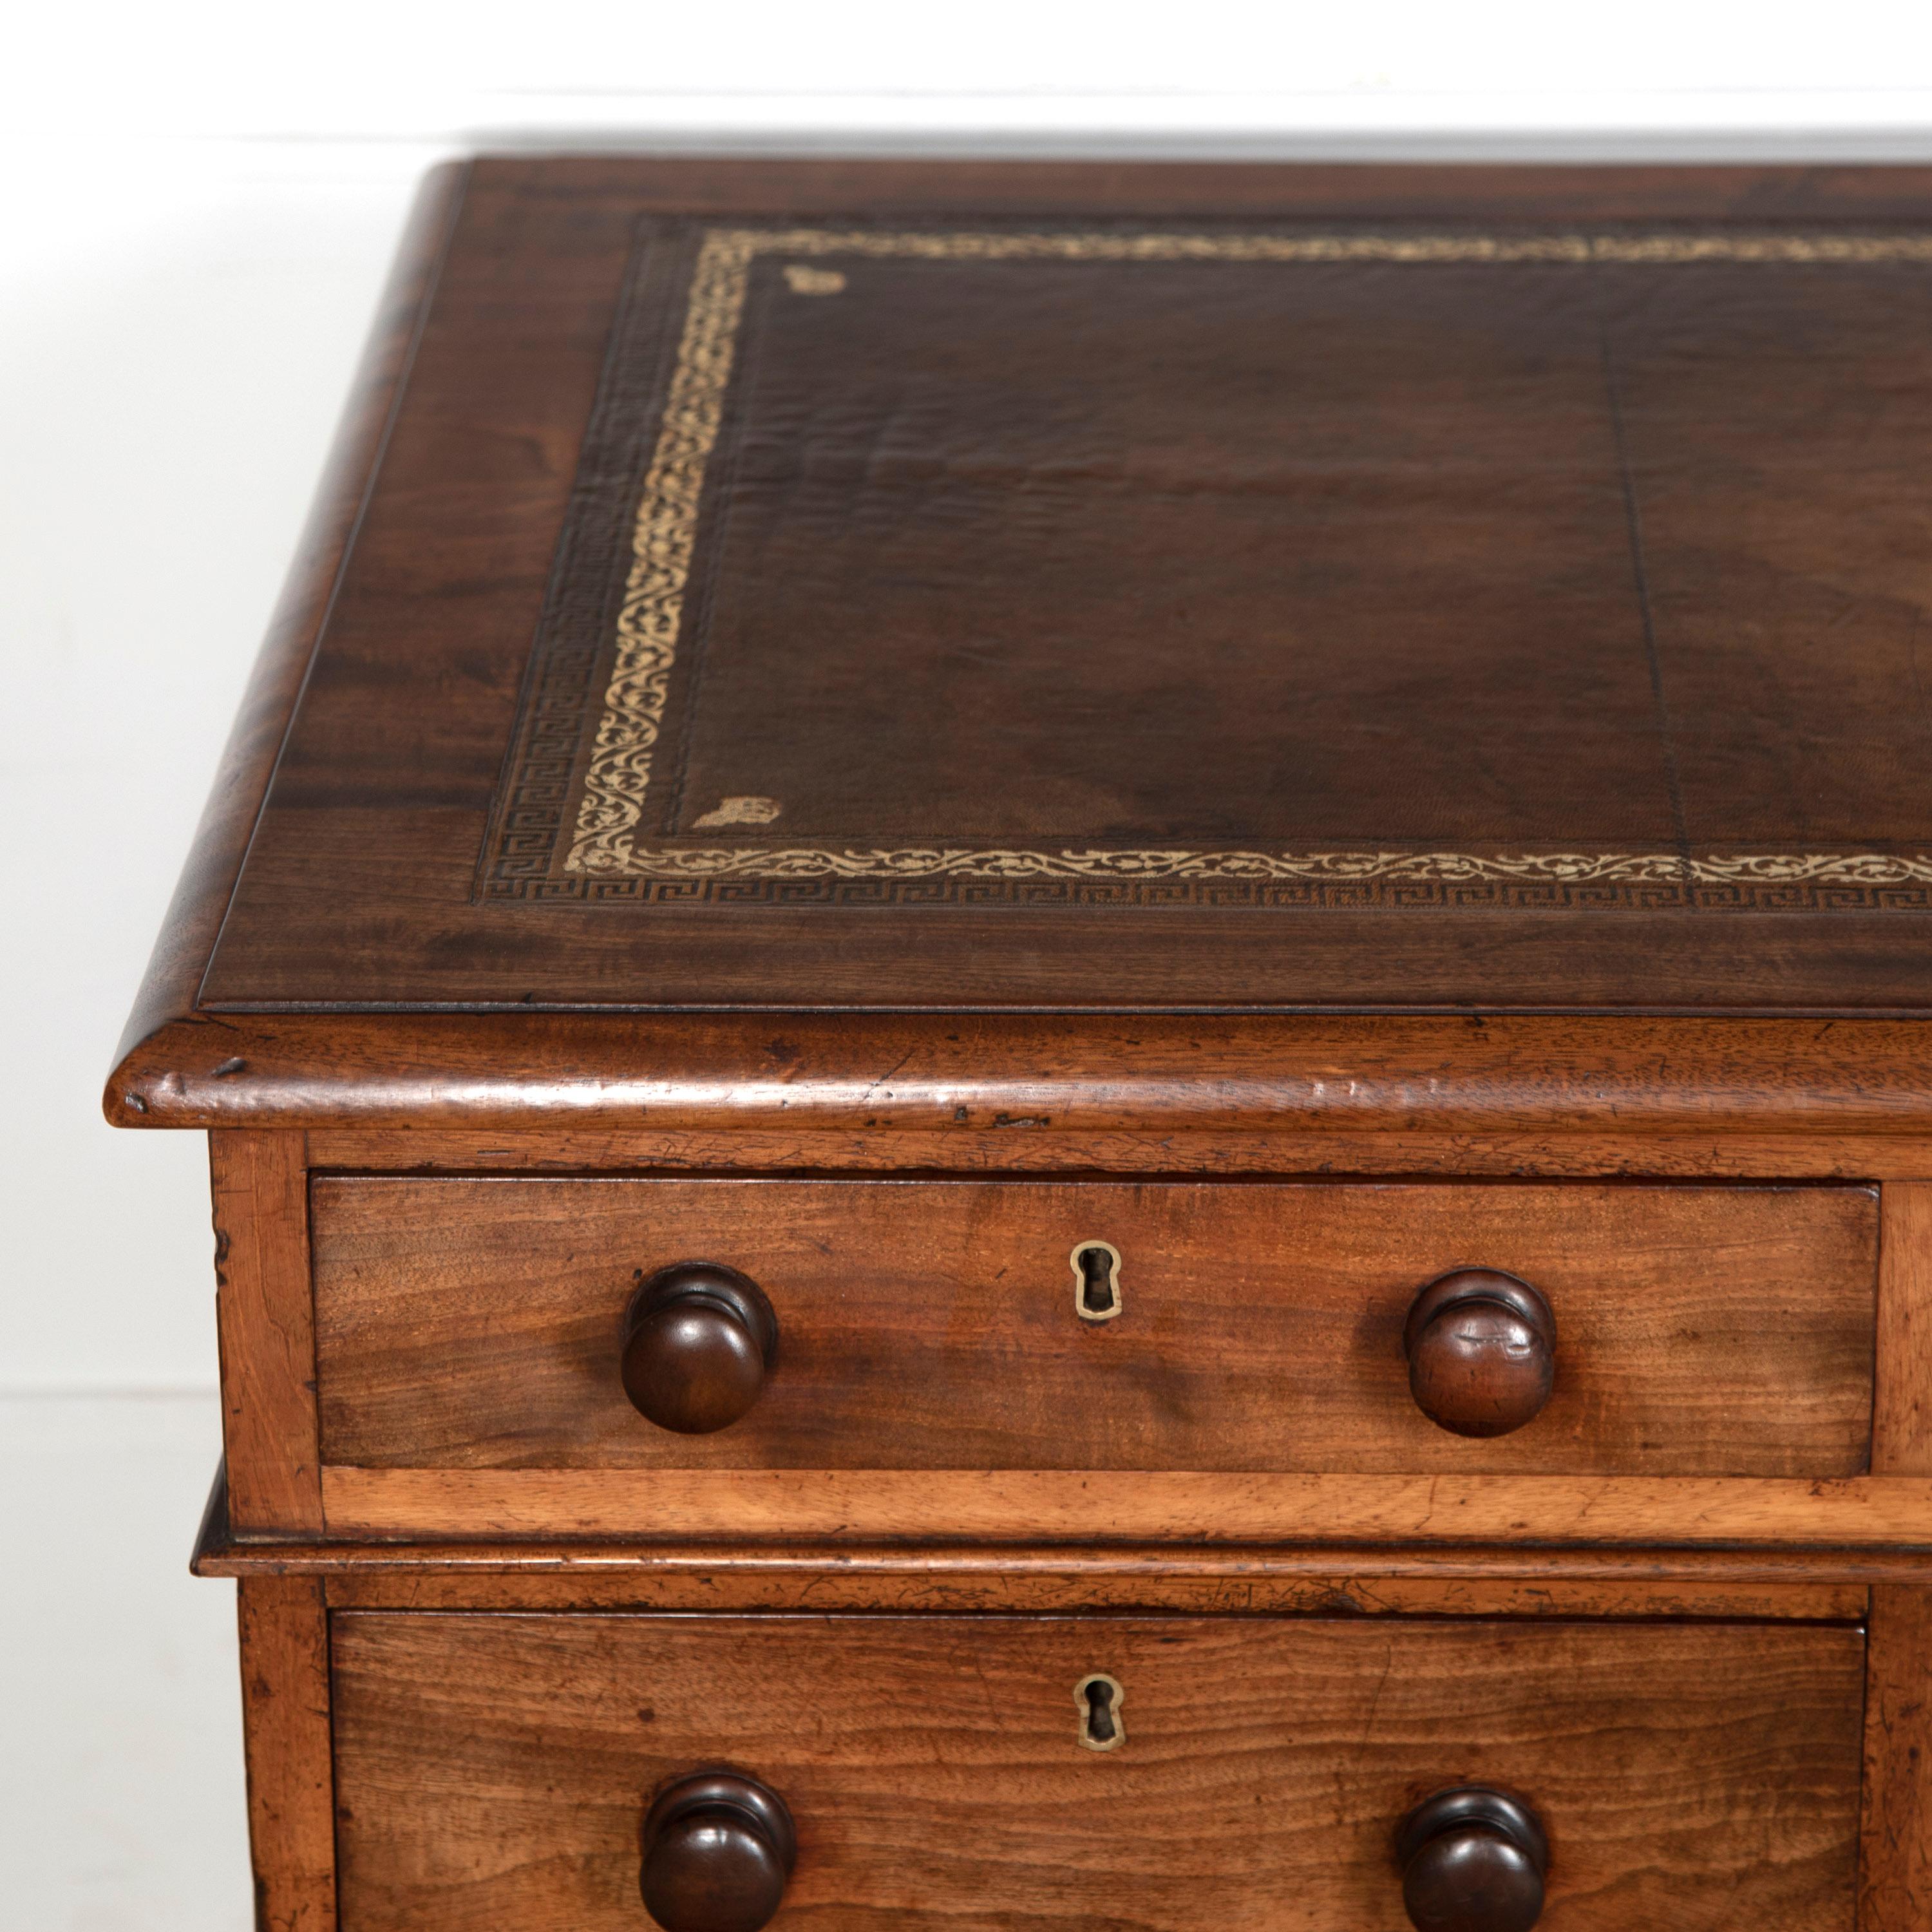 Fine quality 19th century mahogany pedestal desk. 

This classic desk retains its original gilt-tooled tan leather top. Across the frieze are two short drawers and one long one.

There are a further three drawers to each pedestal, all with